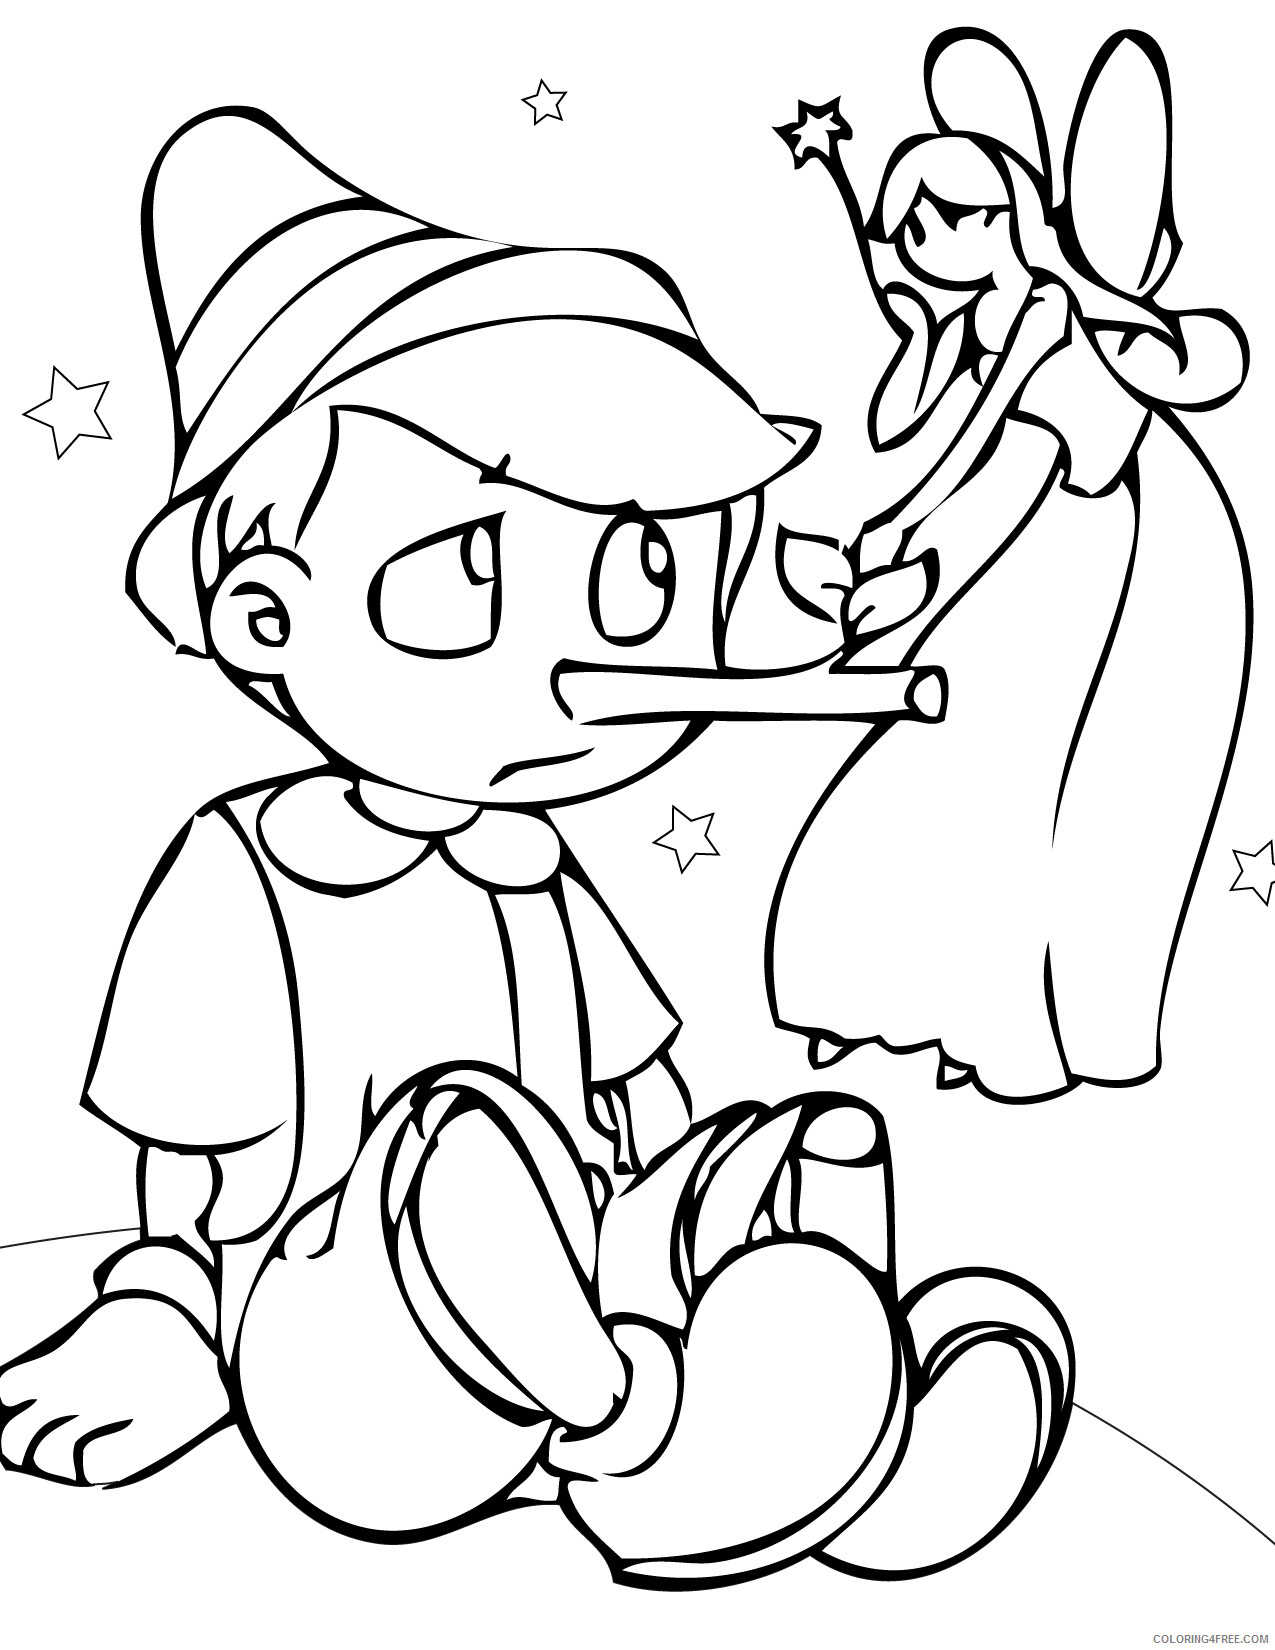 Pinocchio Coloring Pages TV Film Pinocchio Pictures Printable 2020 06393 Coloring4free